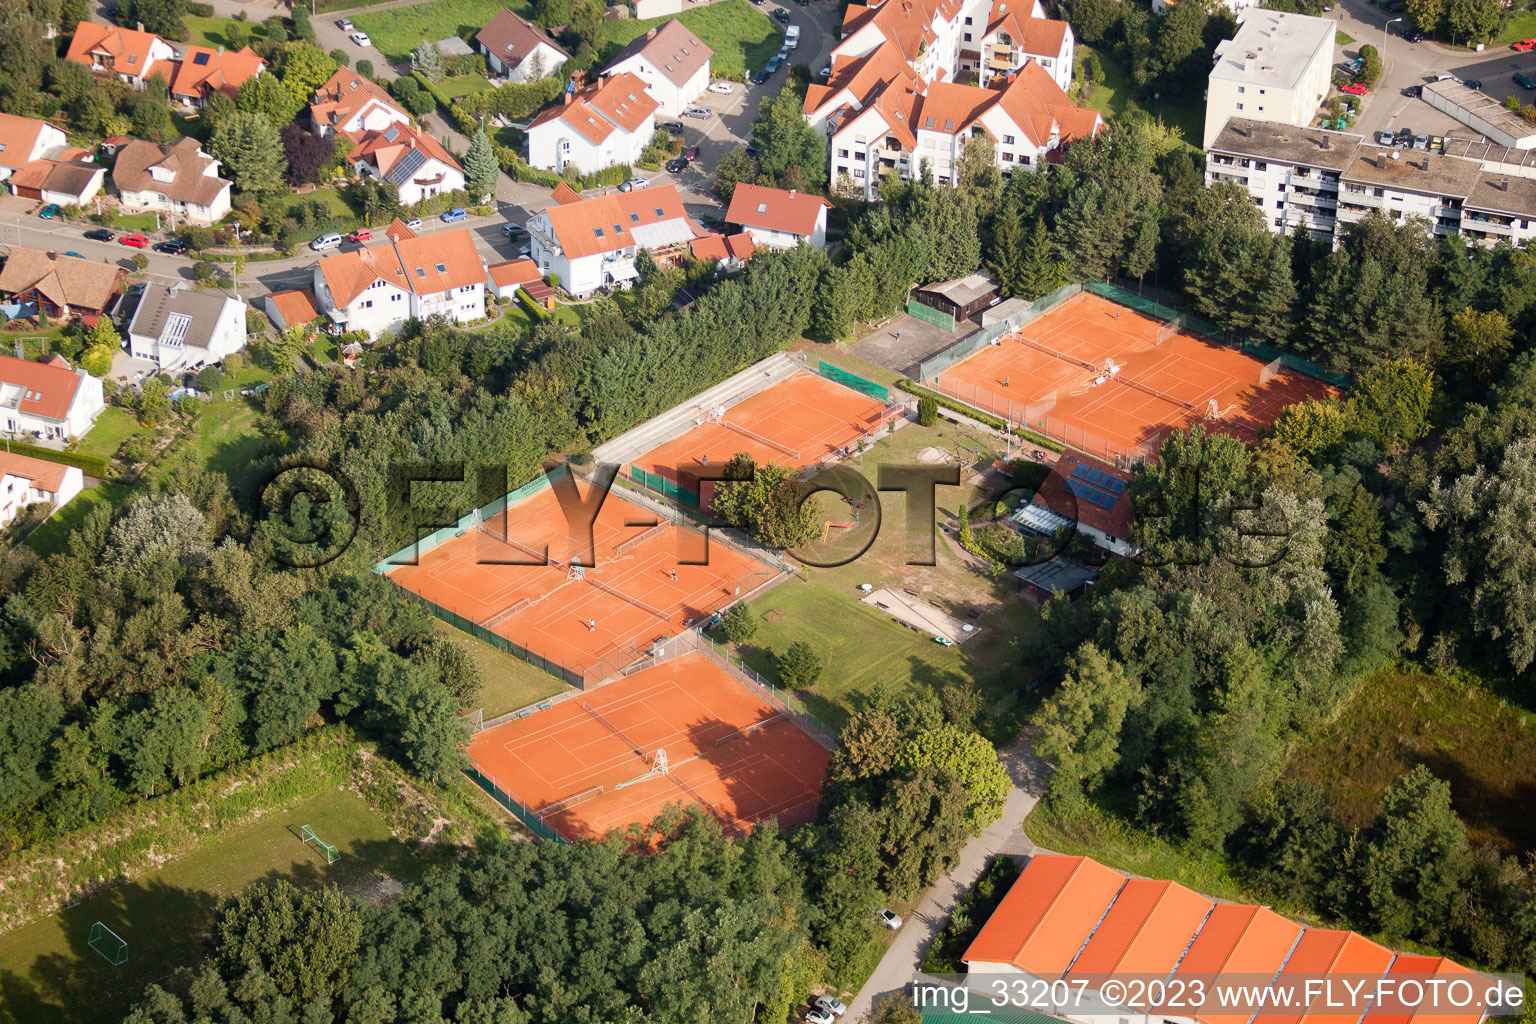 Aerial view of Tennis club in Jockgrim in the state Rhineland-Palatinate, Germany